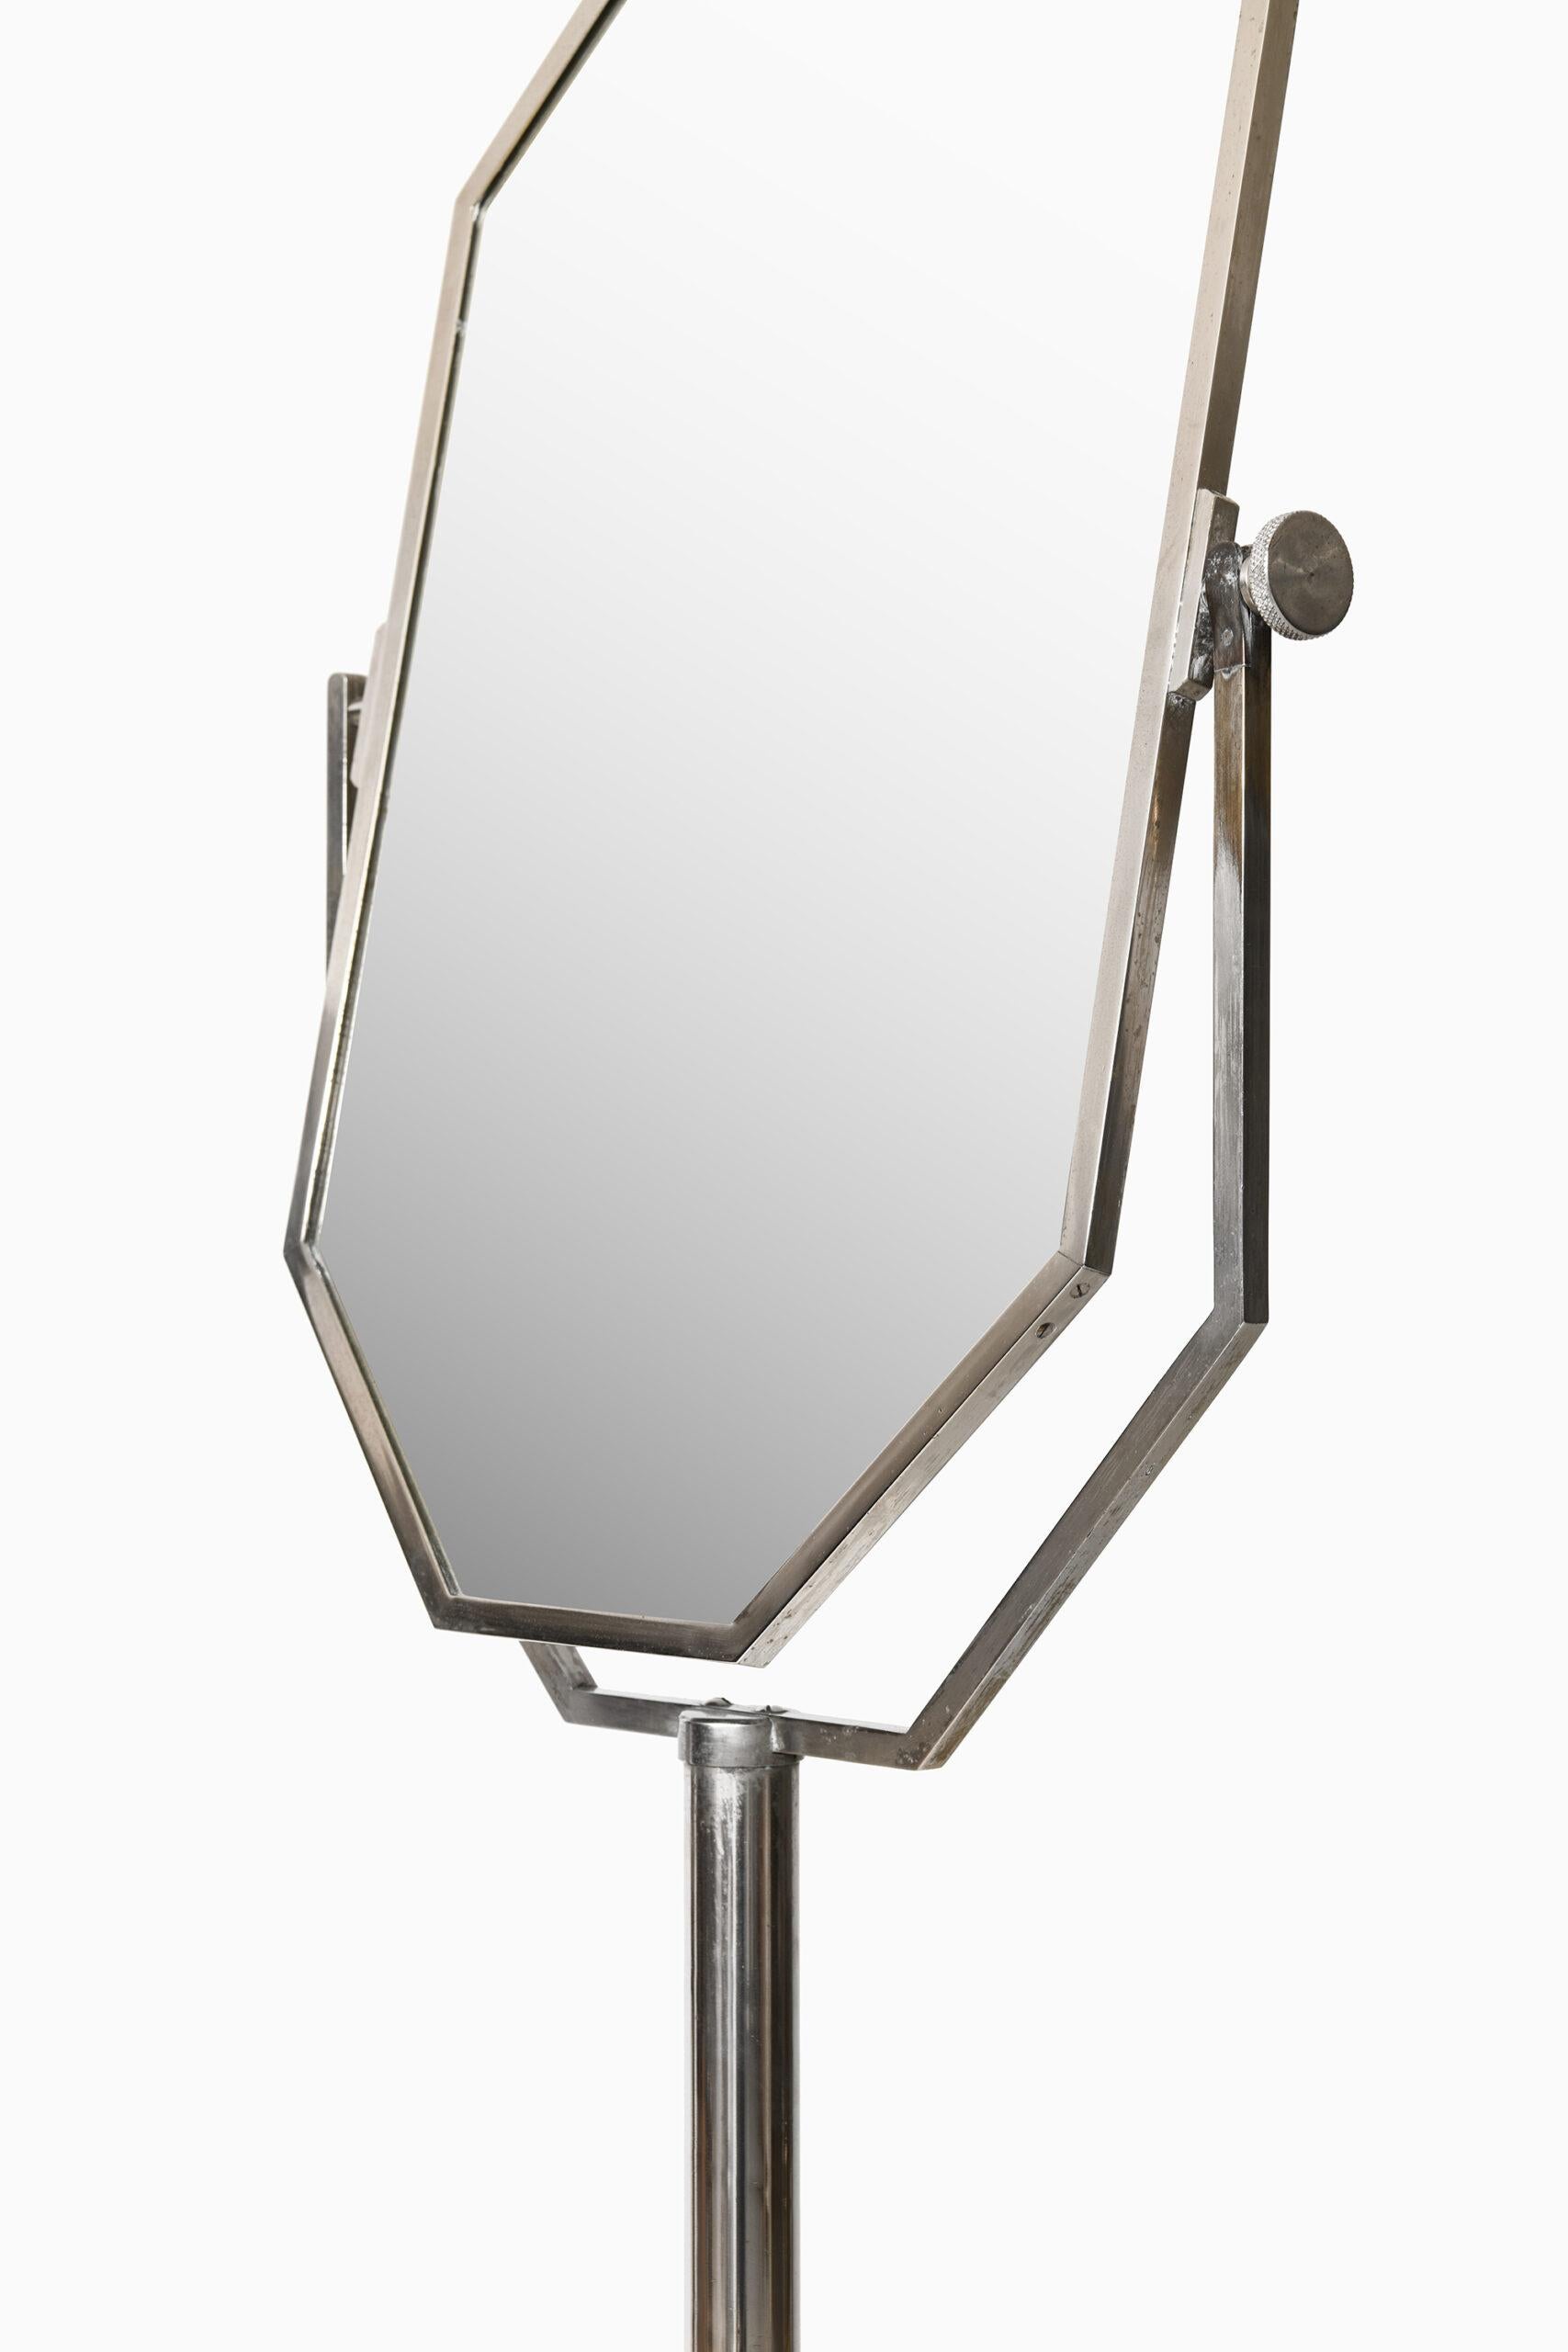 Rare table mirror by unknown designer. Probably produced in Sweden.